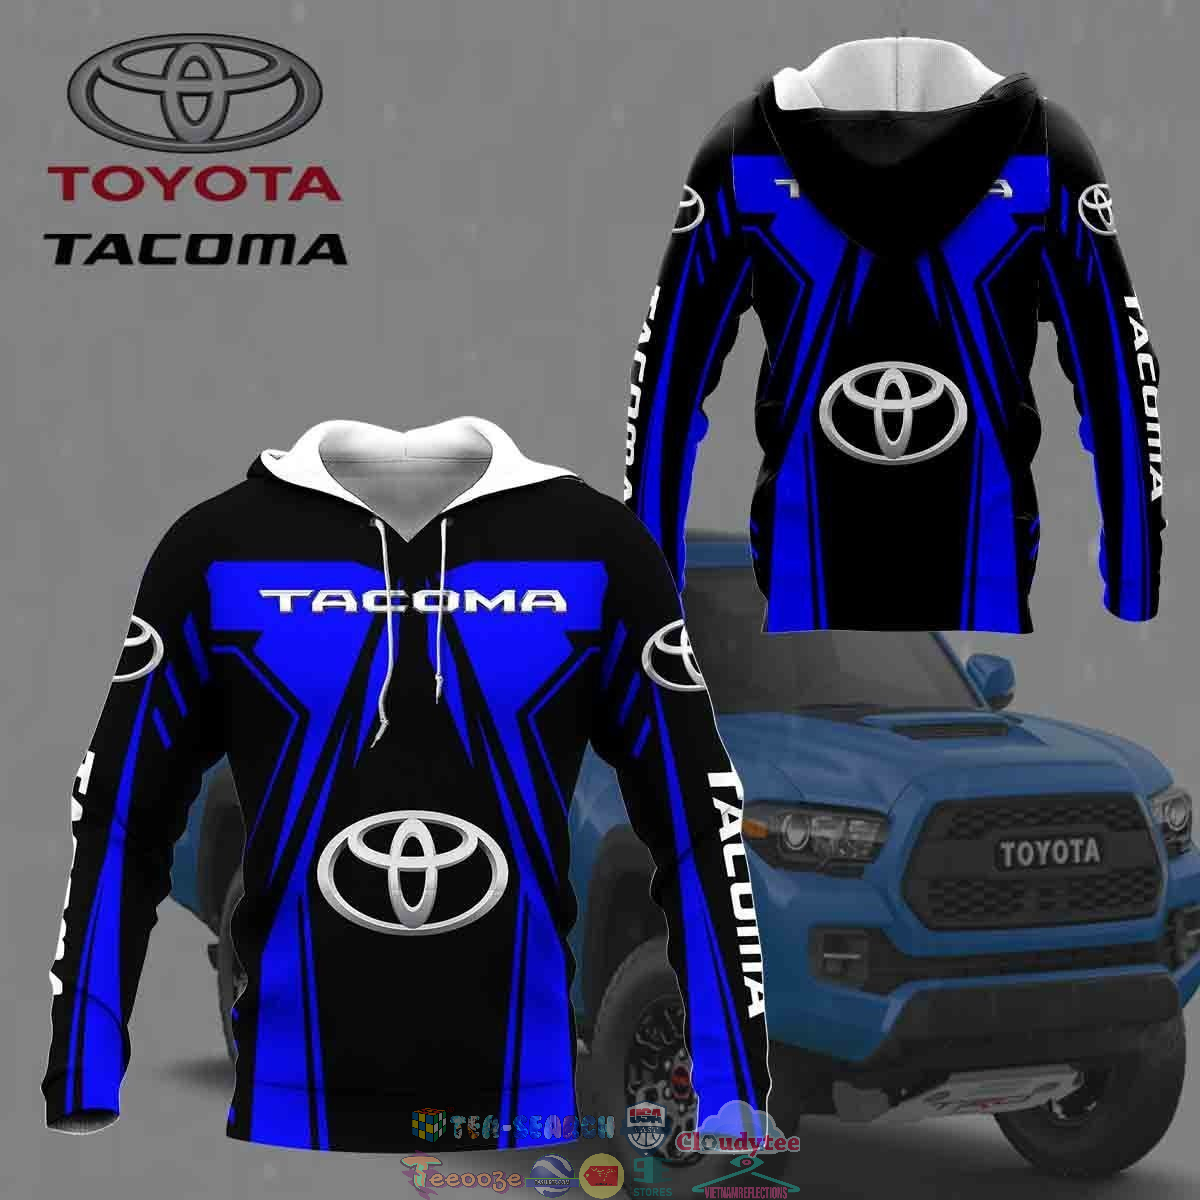 Toyota Tacoma ver 20 3D hoodie and t-shirt